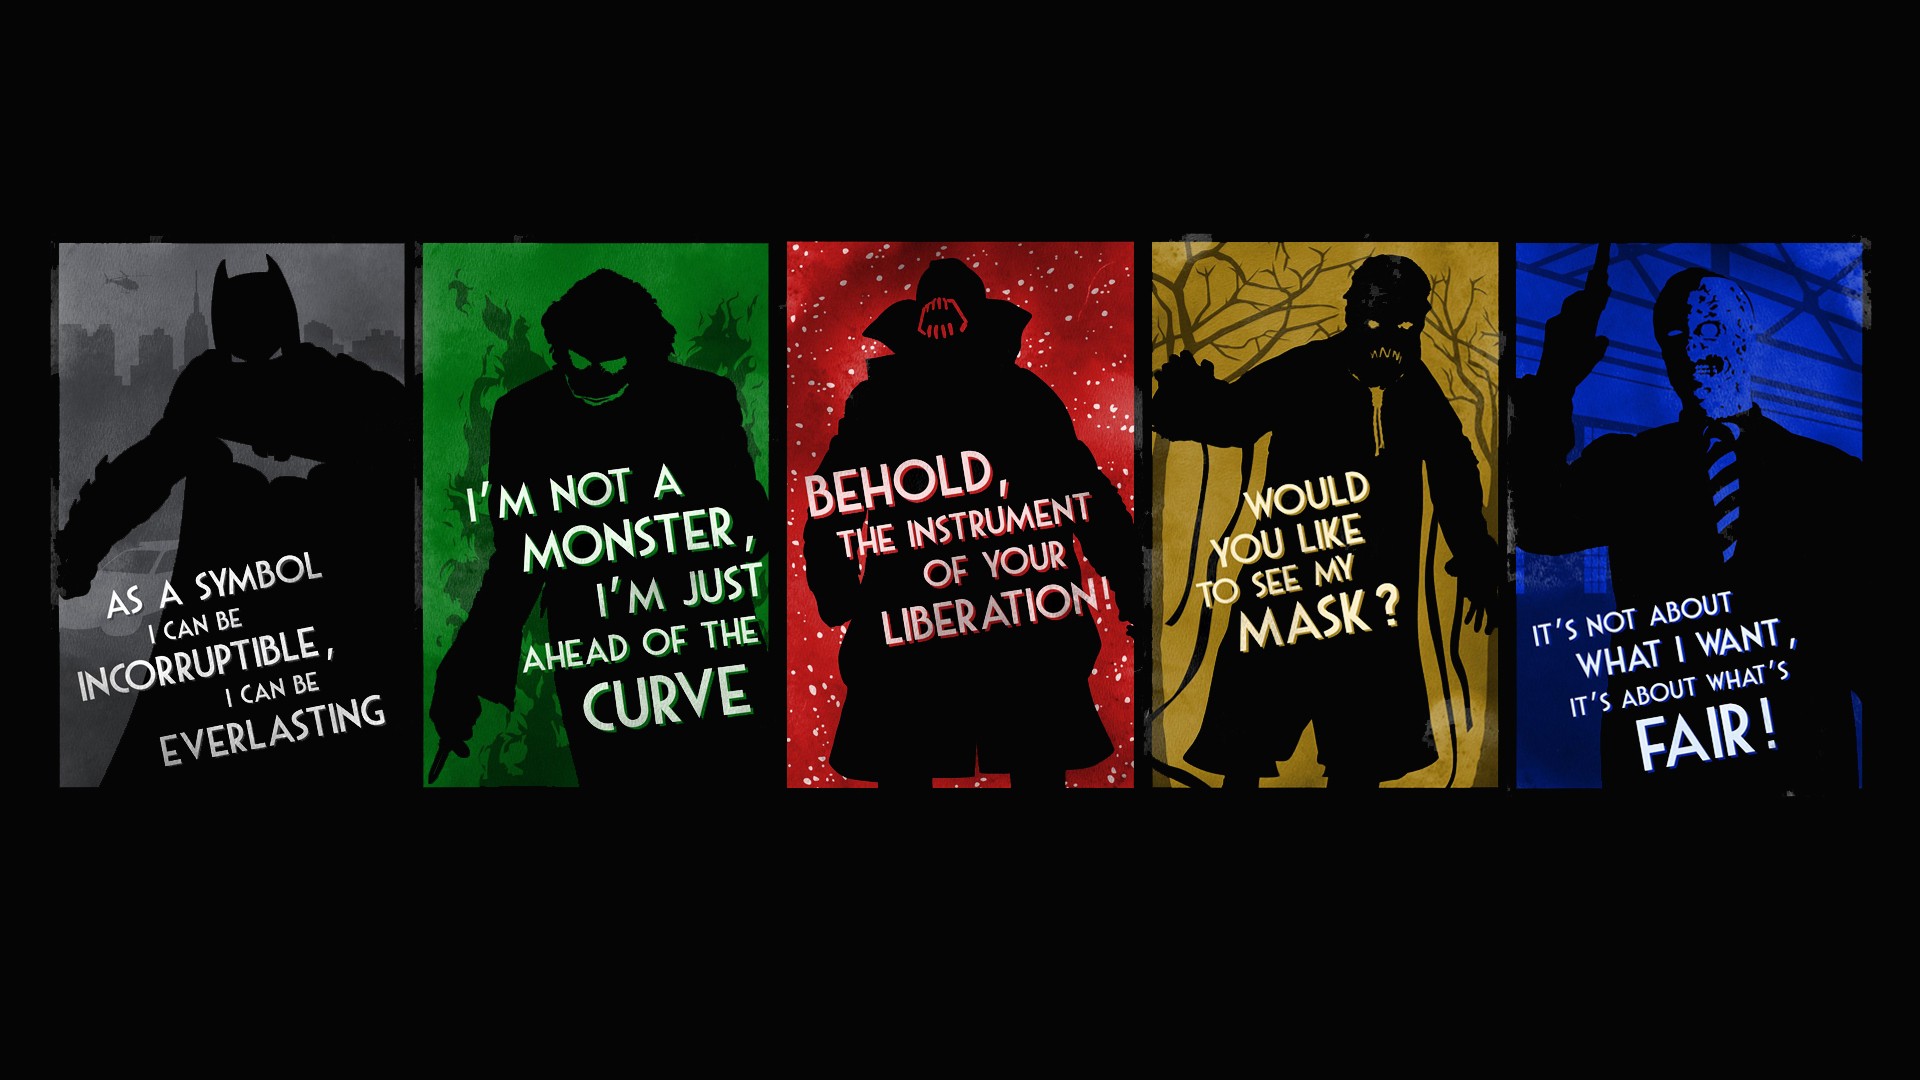 The Dark Knight DC Comics Batman Typography Quote Villains Joker Bane Scarecrow Character Two Face B 1920x1080